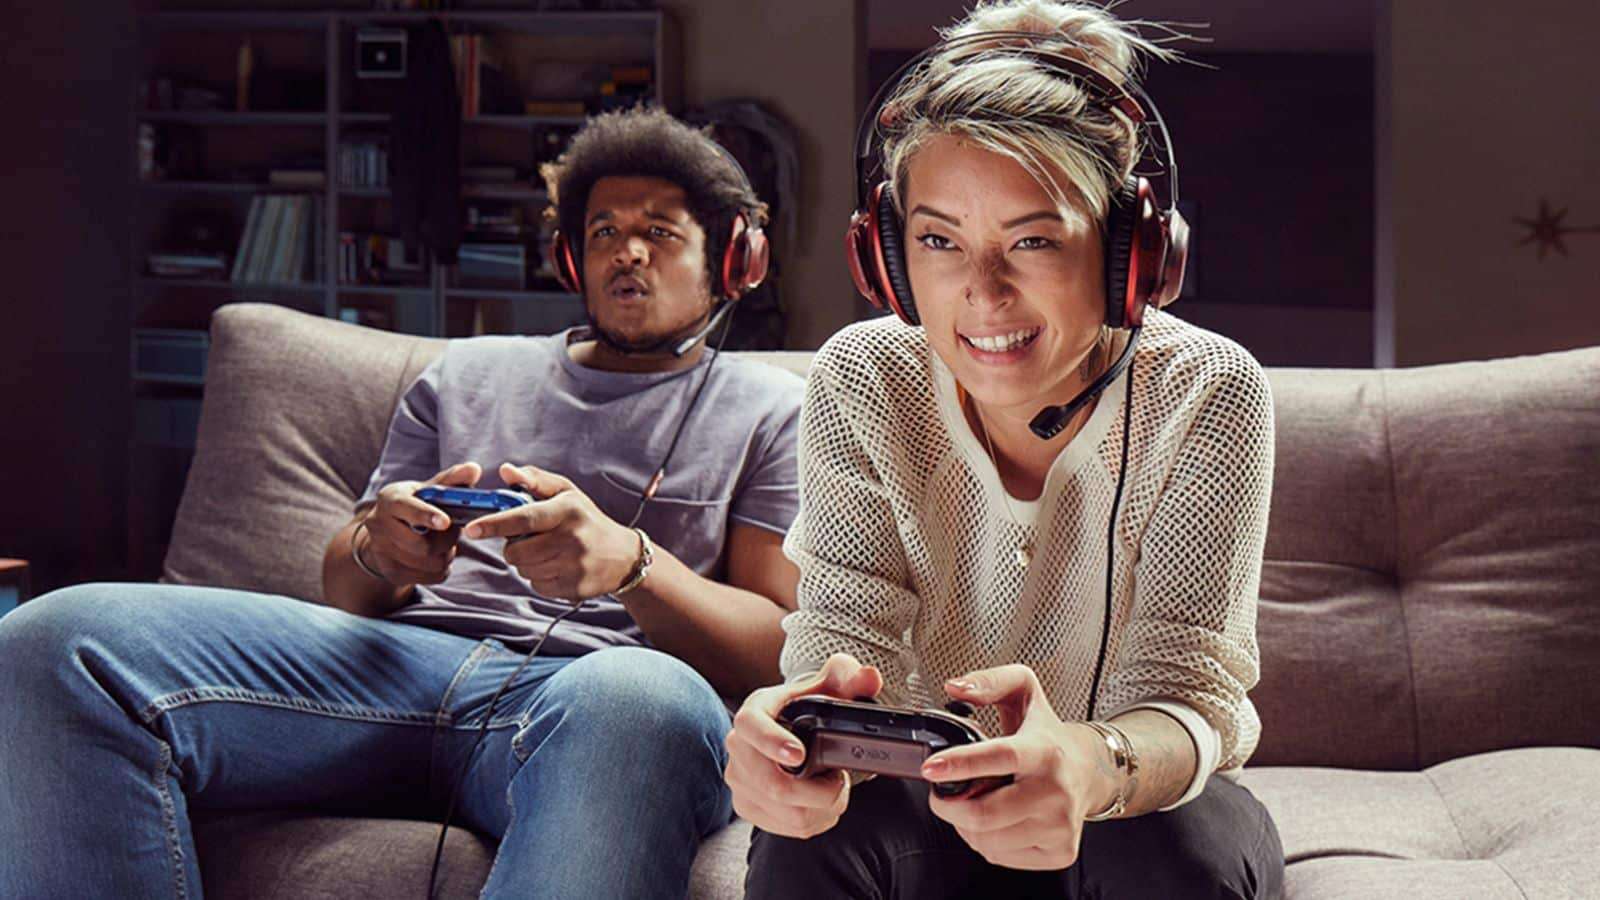 Two friends playing Xbox